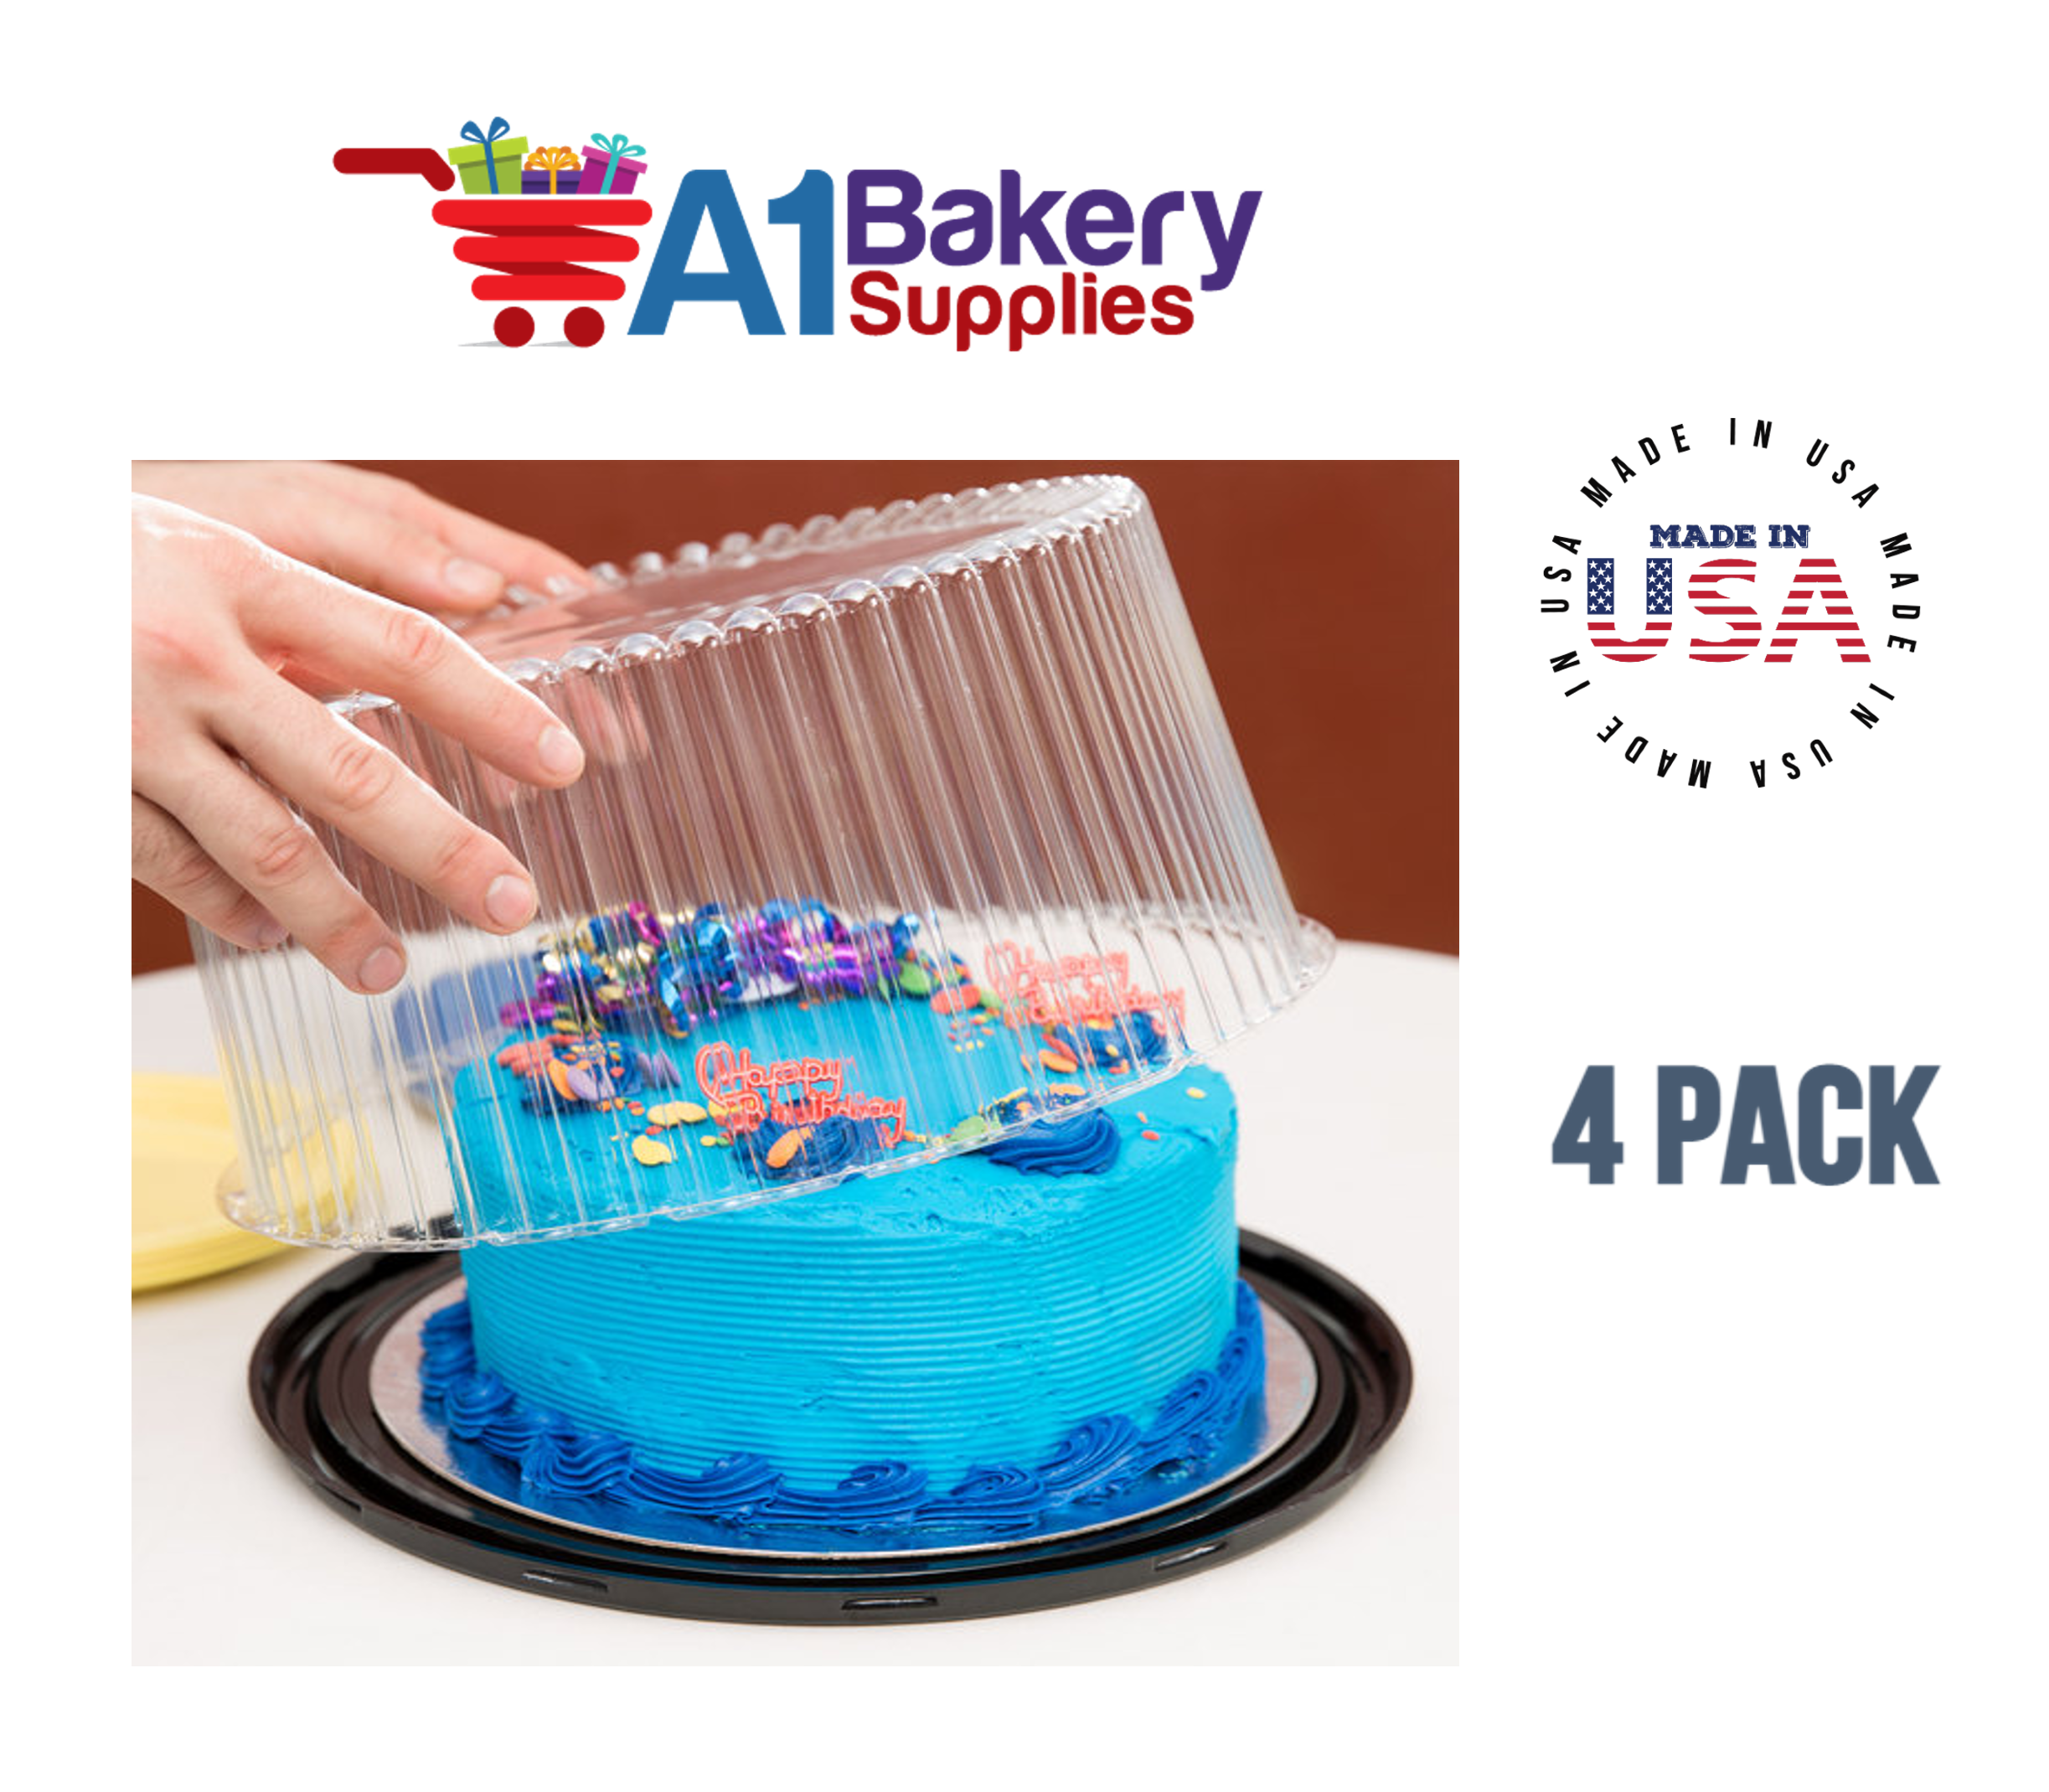 10-11 Plastic Disposable Cake Containers Carriers with Clear Dome